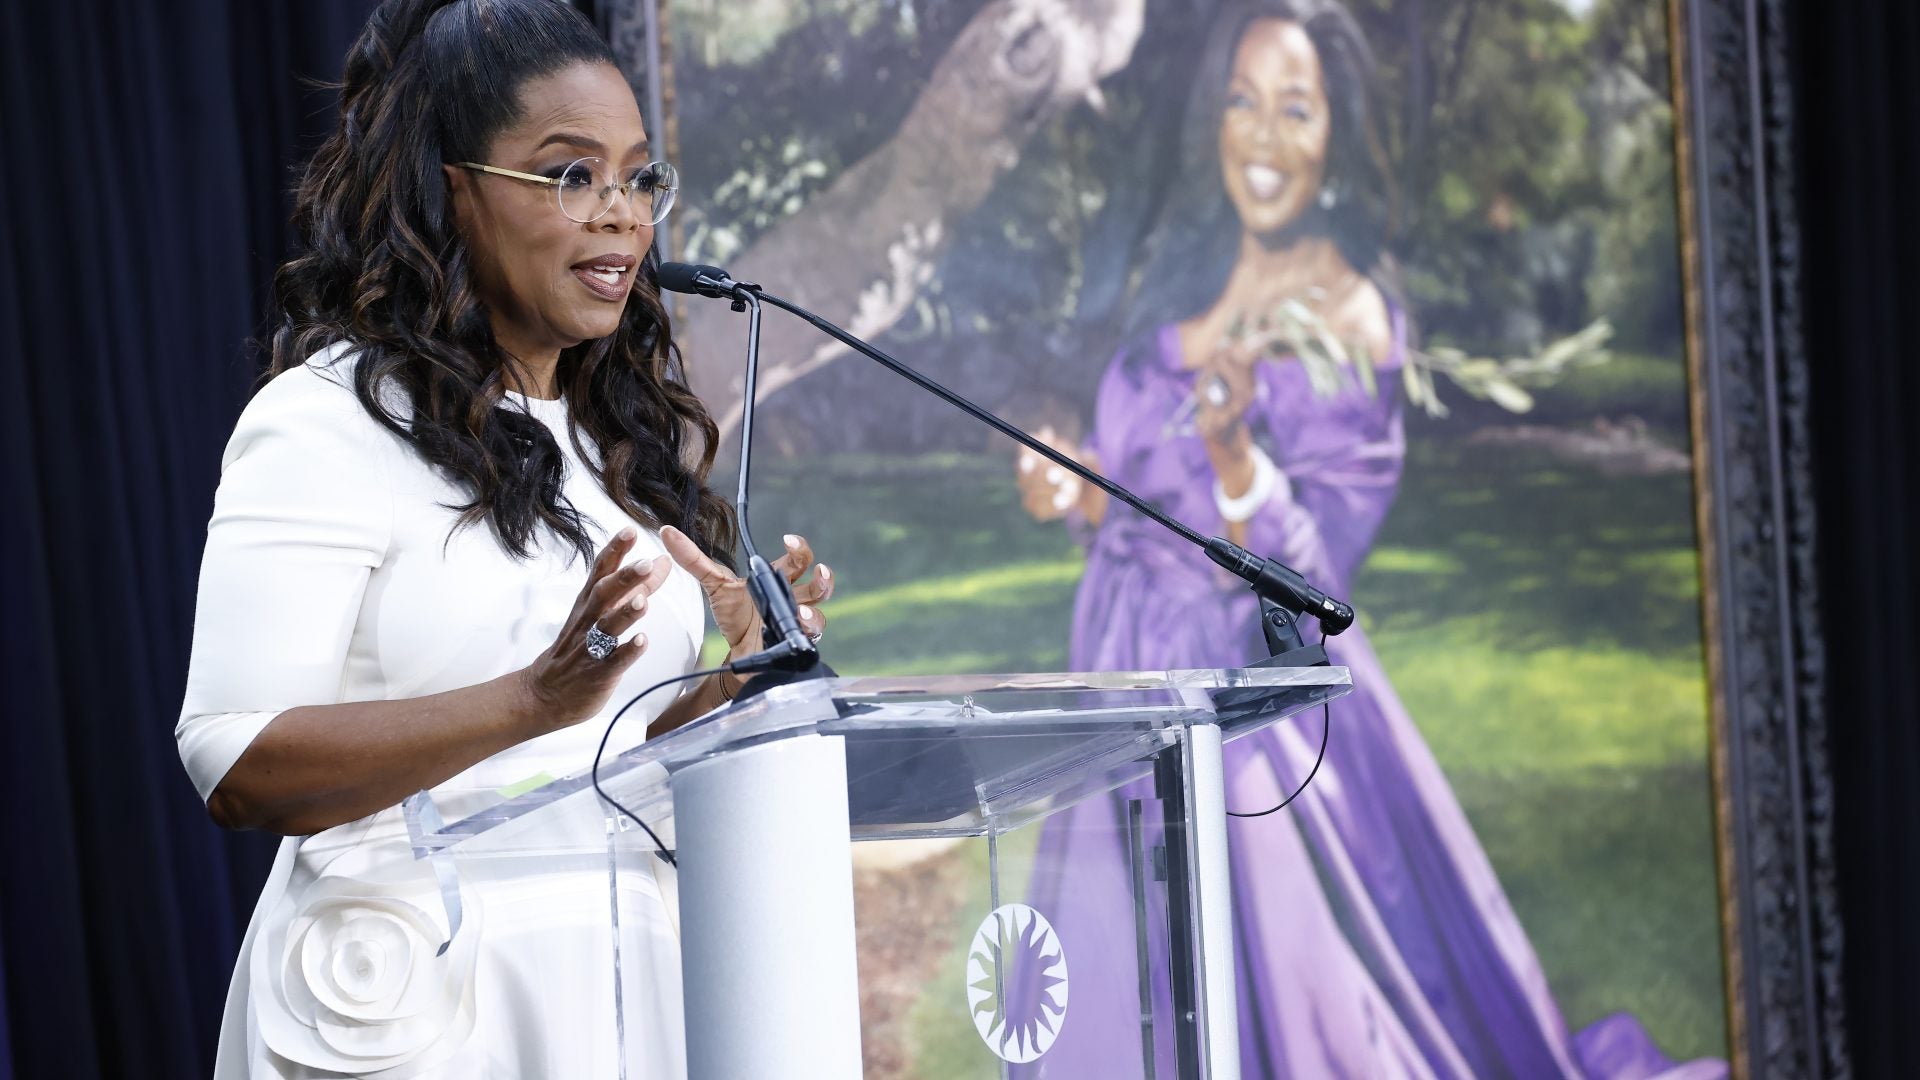 Oprah Winfrey Portrait Unveiled At The Smithsonian’s National Portrait Gallery